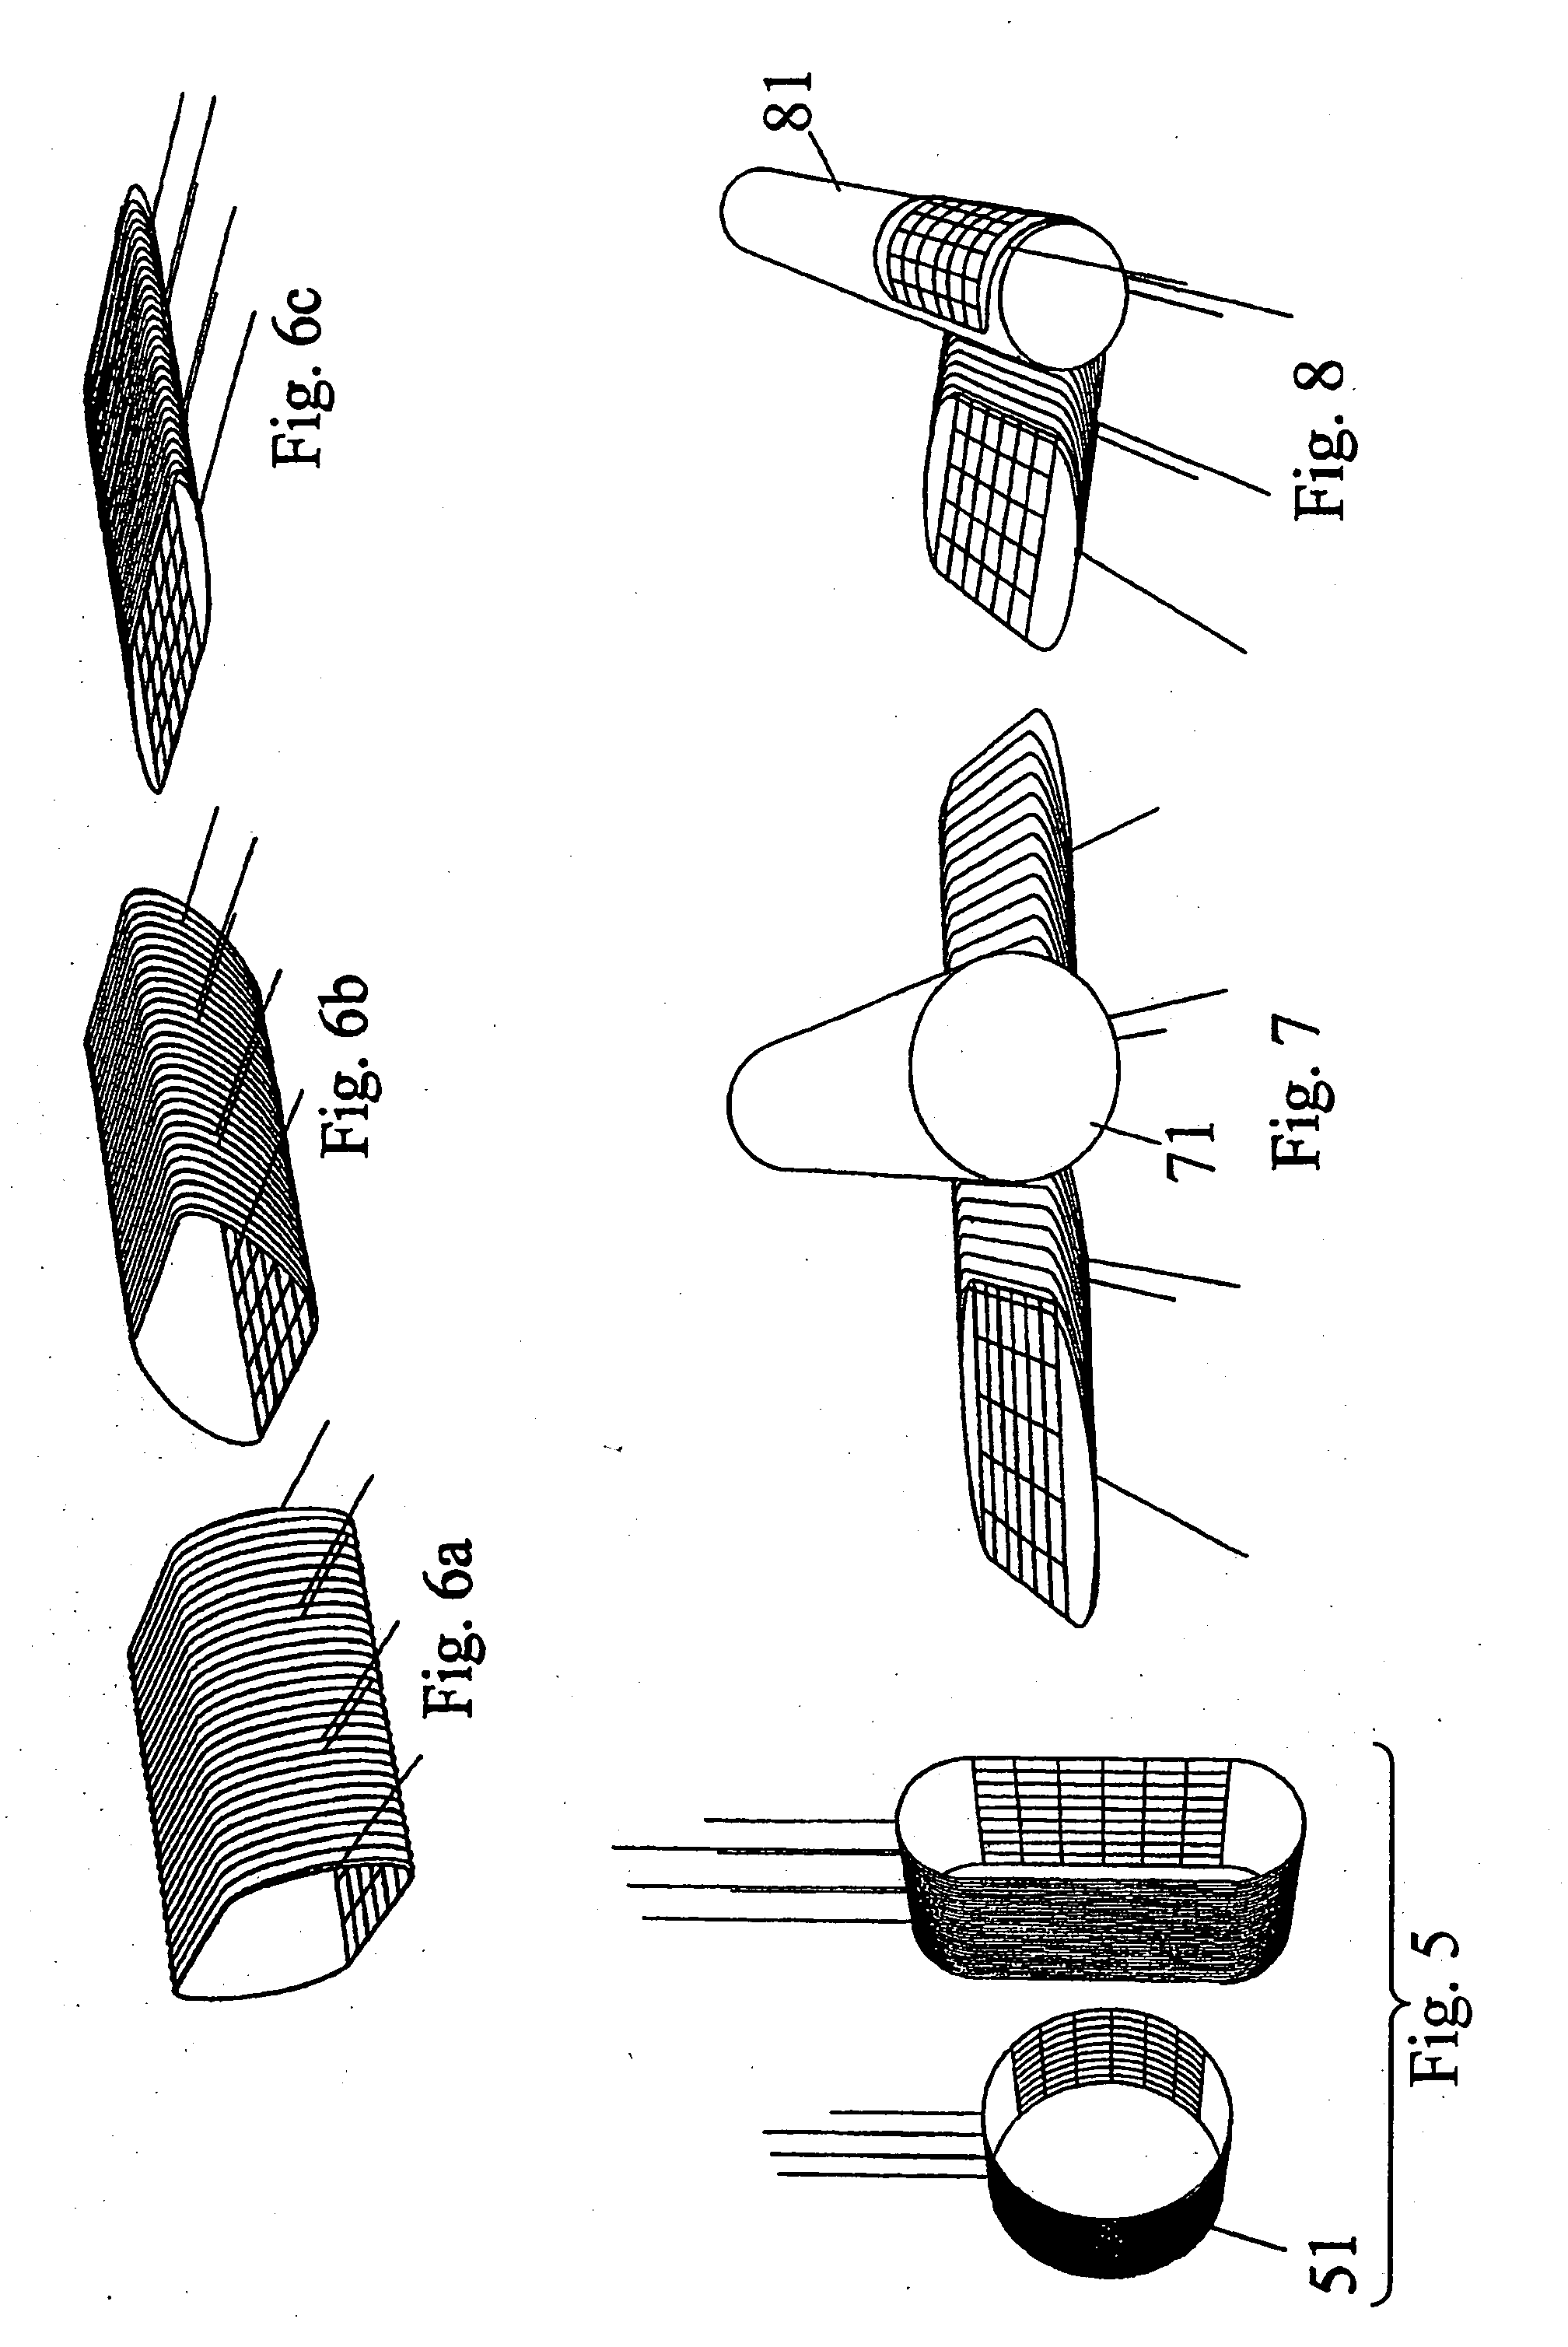 Method of making a coil for an electrical motor